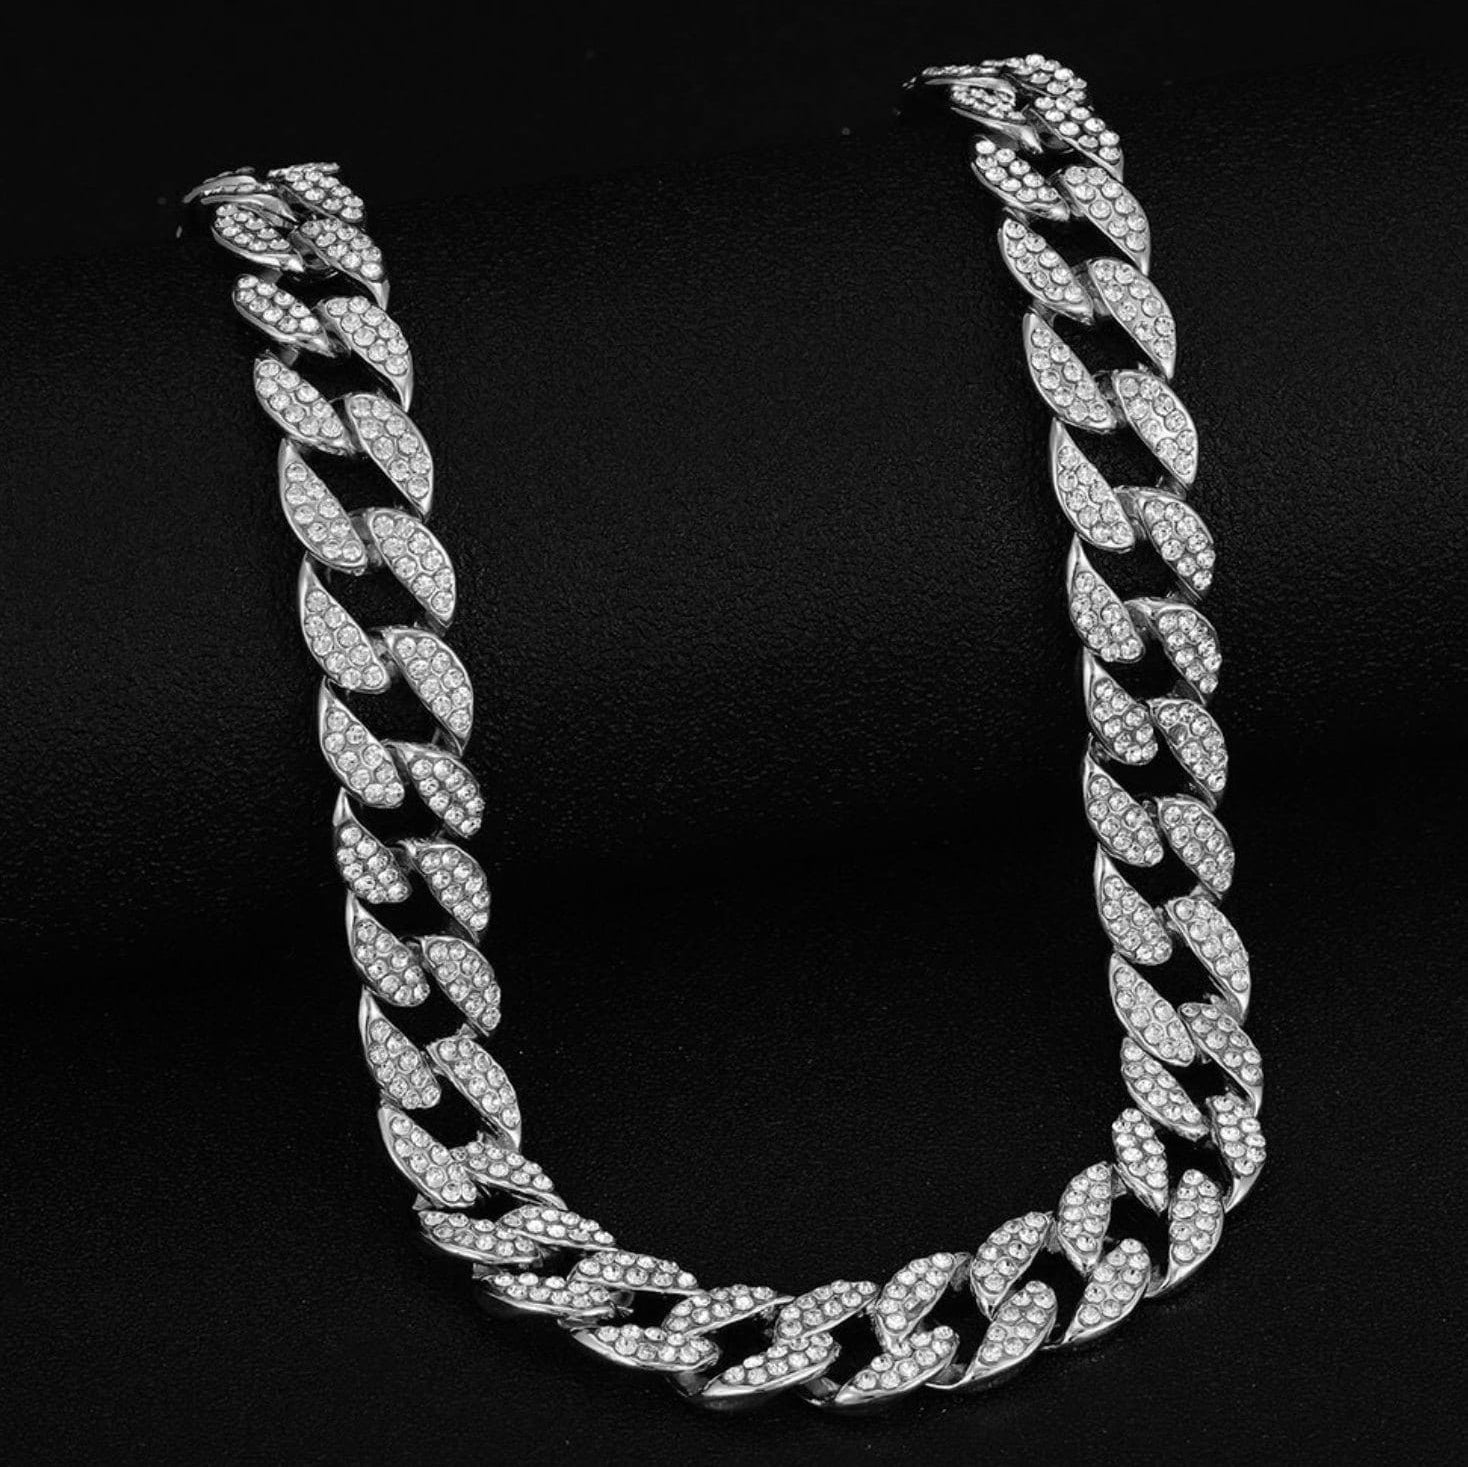 12MM Iced Diamond Miami Cuban Link Chain - 22IN White Gold - Men's Jewelry - Hip Hop Necklace - VVS Cubic Zirconia Gift for Men